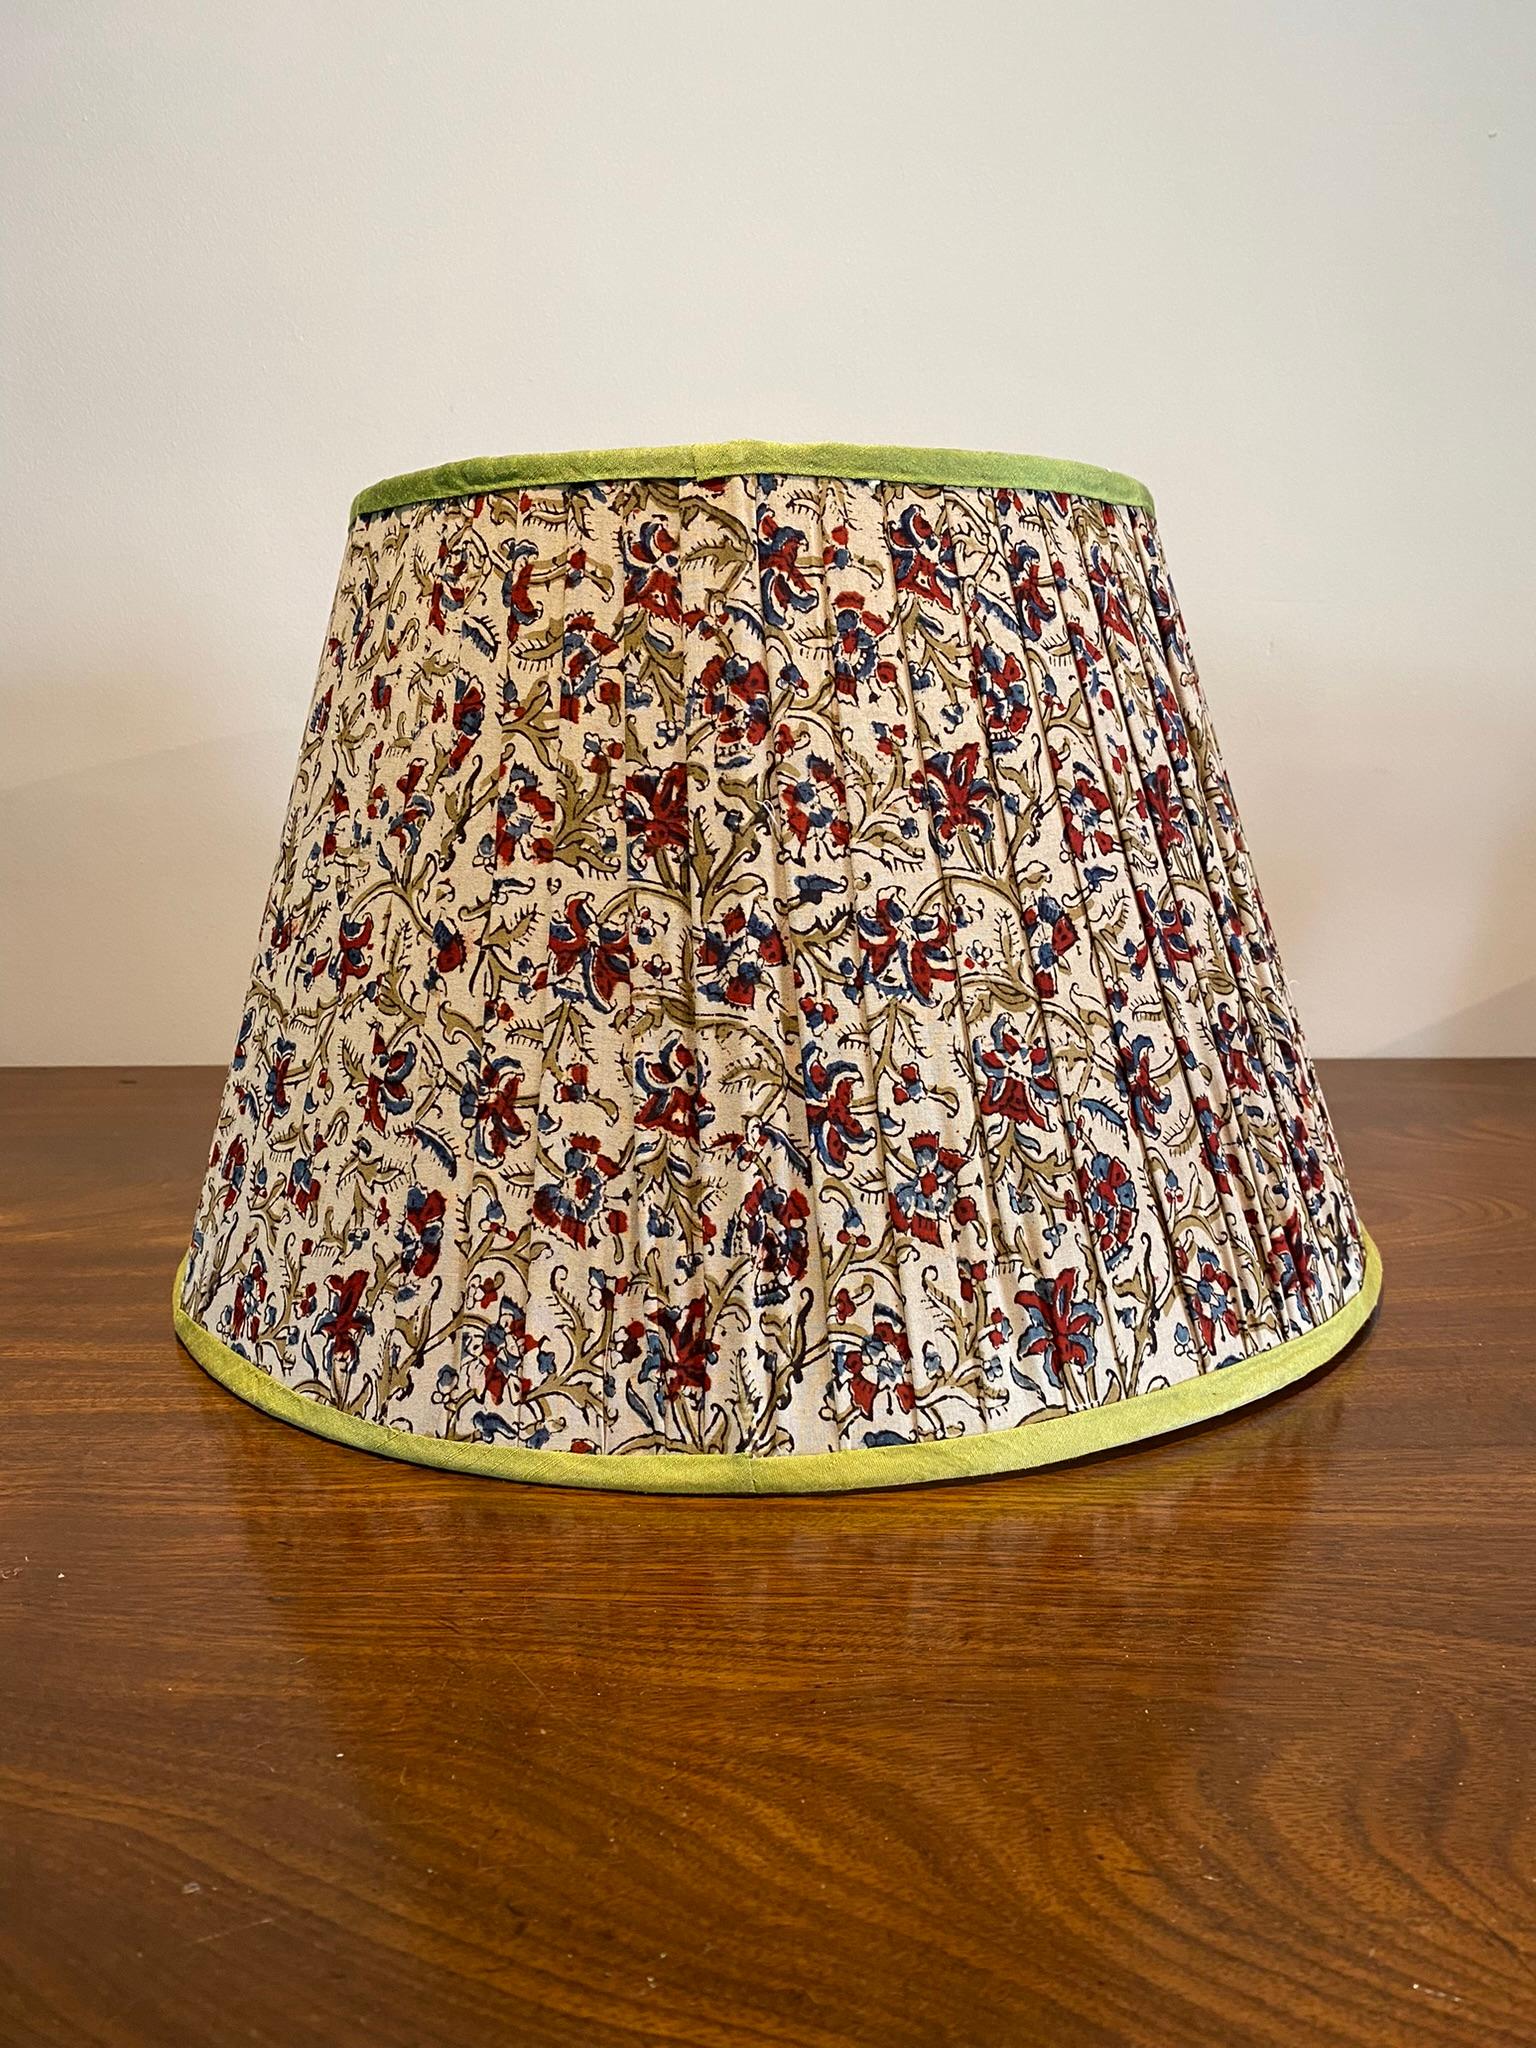 18” Indian sari lampshade with duplex fitting.

These are handmade lampshades made from Indian sari silks and cotton.

Due to the fact these shades are on display in my showroom and their delicate nature, they occasionally show signs of handling